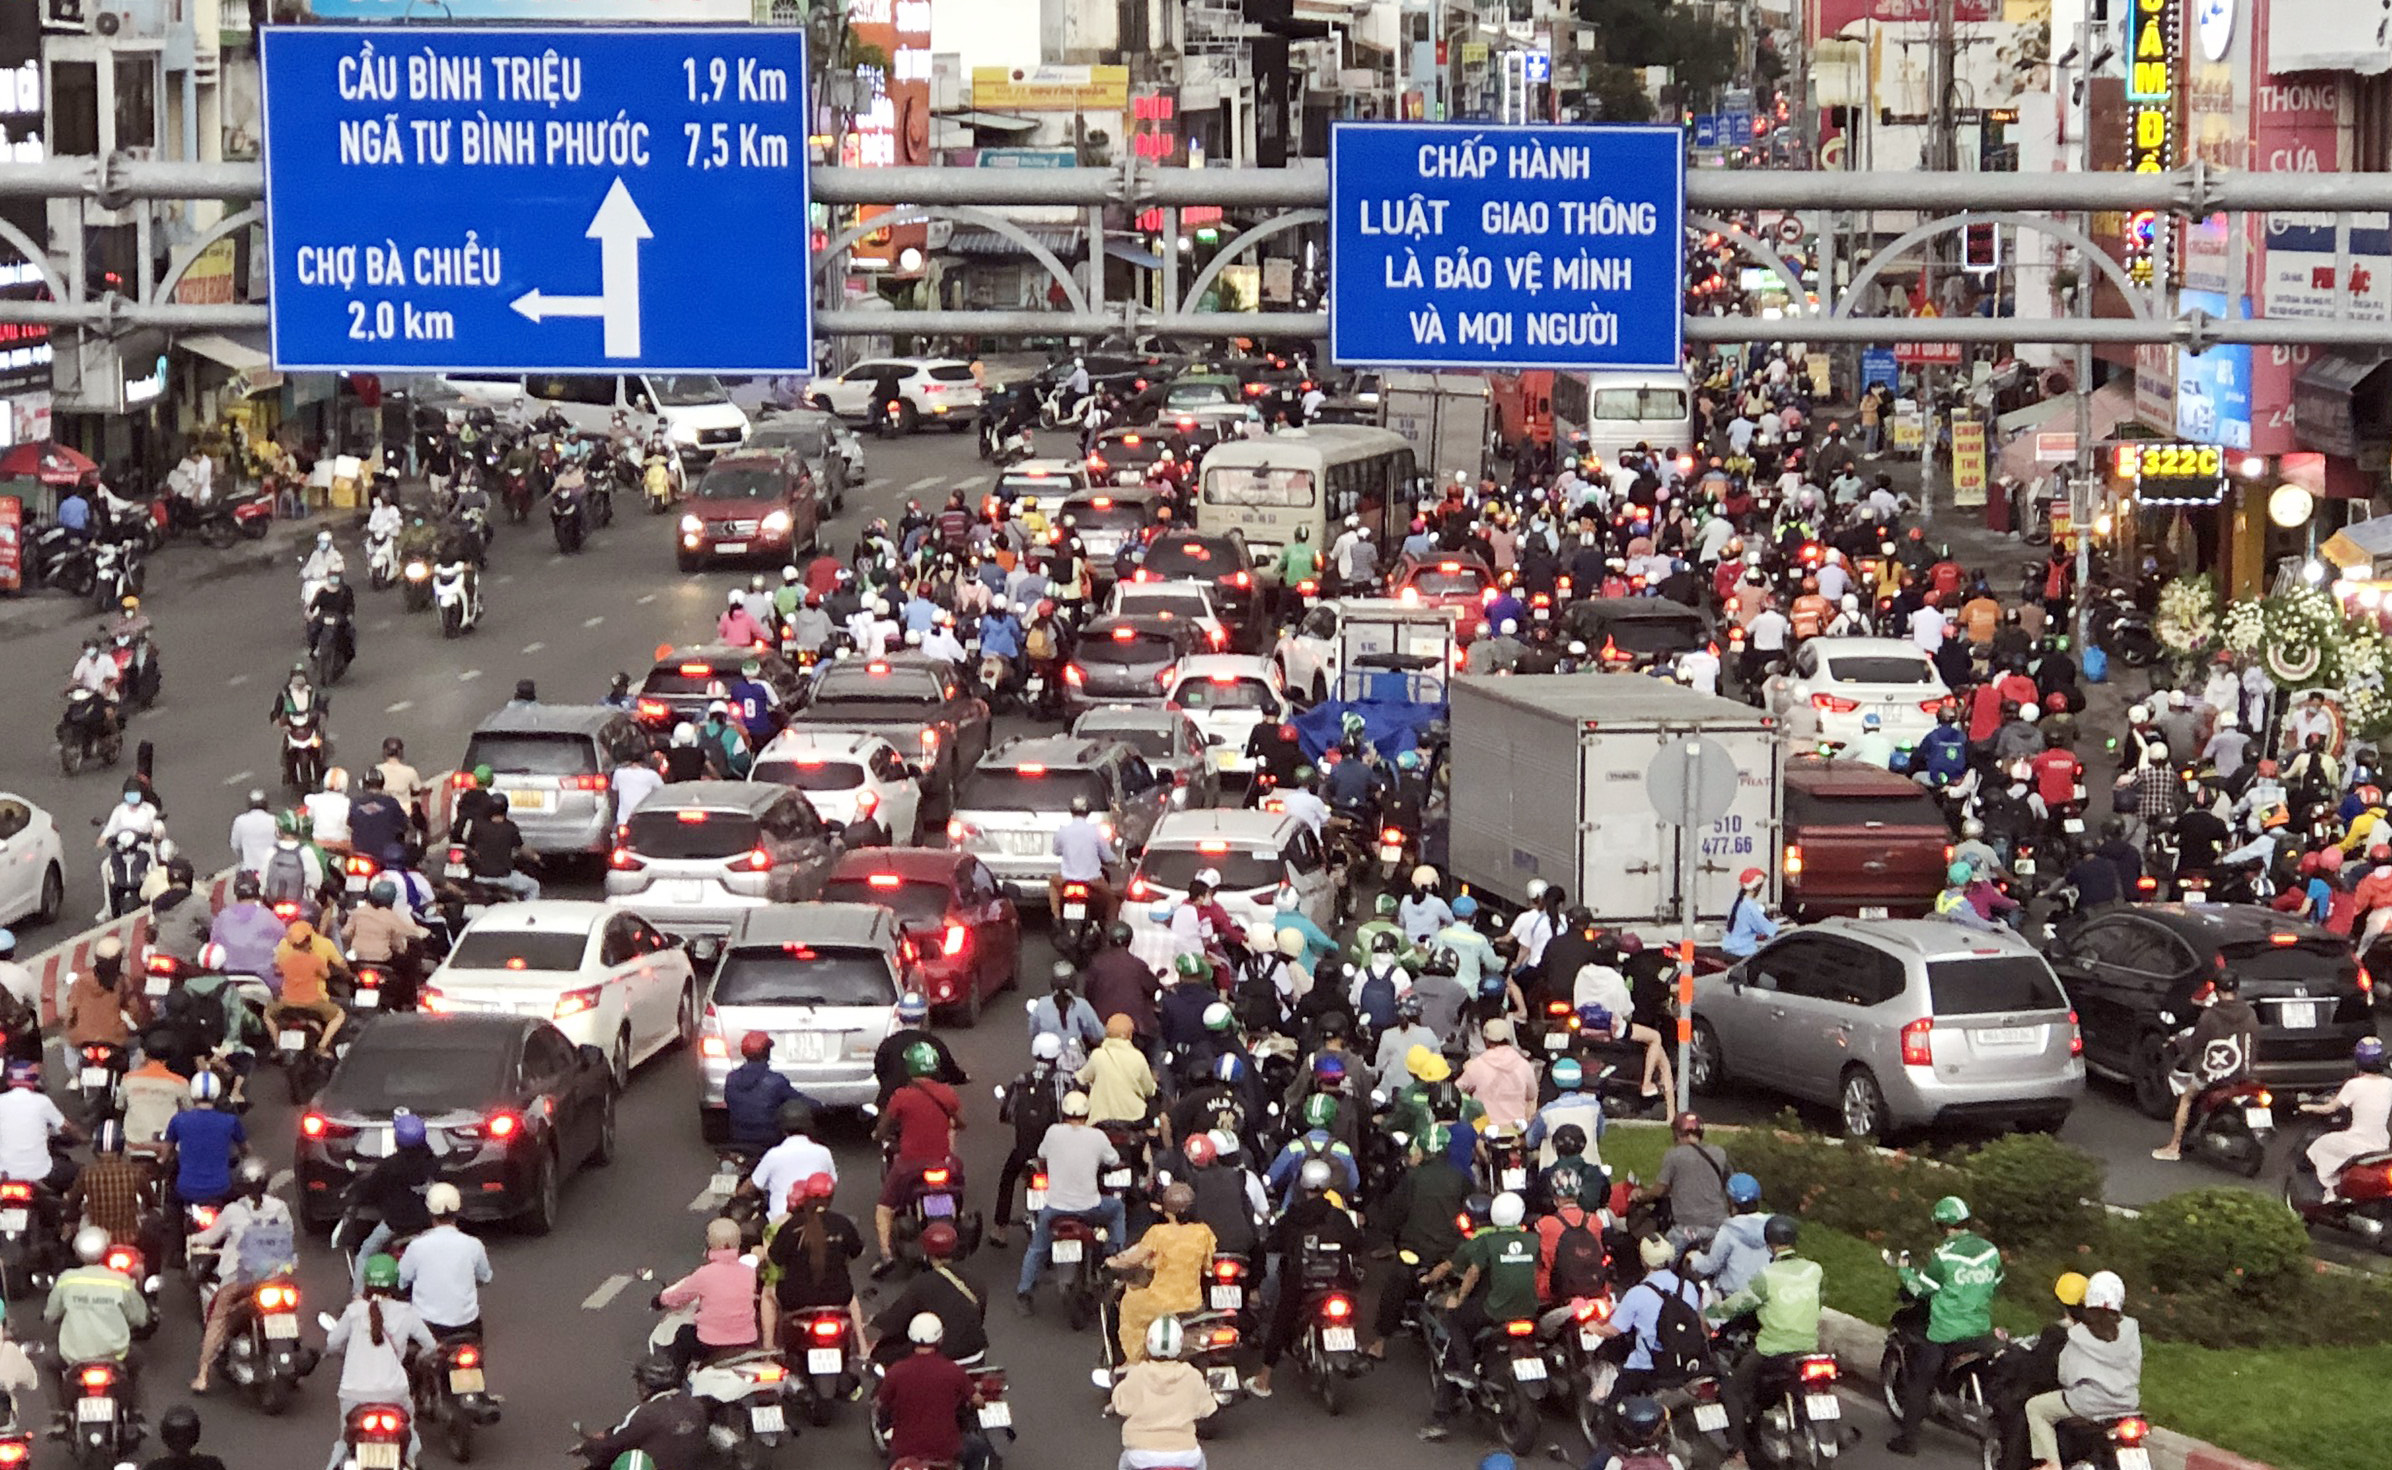 The queue of cars followed each other back to their hometown for the holidays of April 30 and May 1, the streets of Hanoi and Ho Chi Minh City were congested - April 28